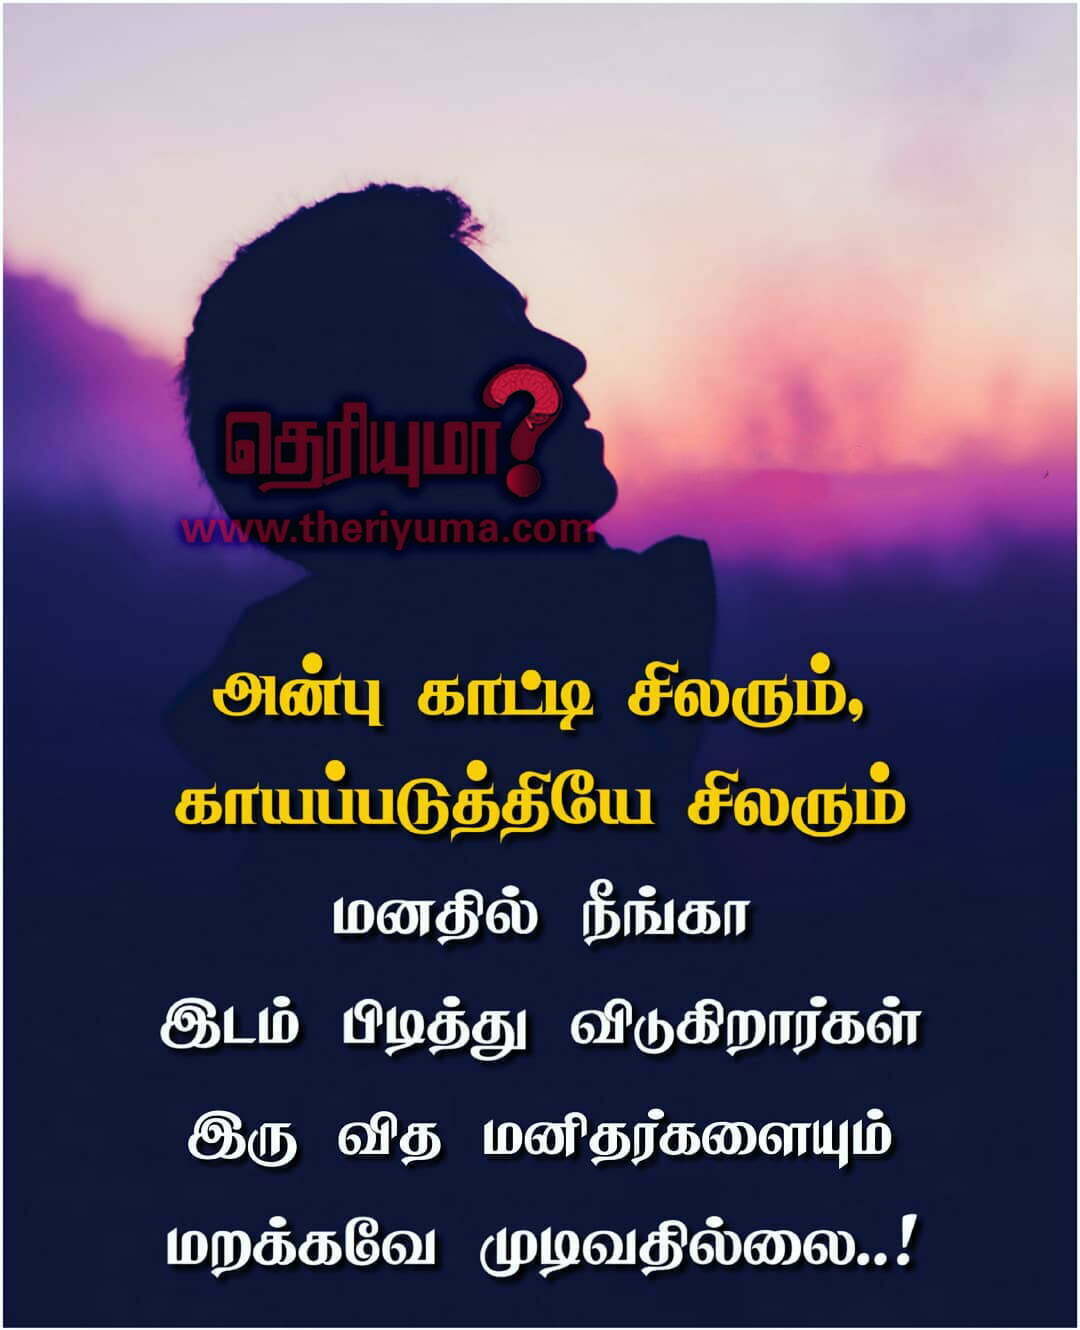 Self motivation quotes in Tamil Motivation quotes in tamil